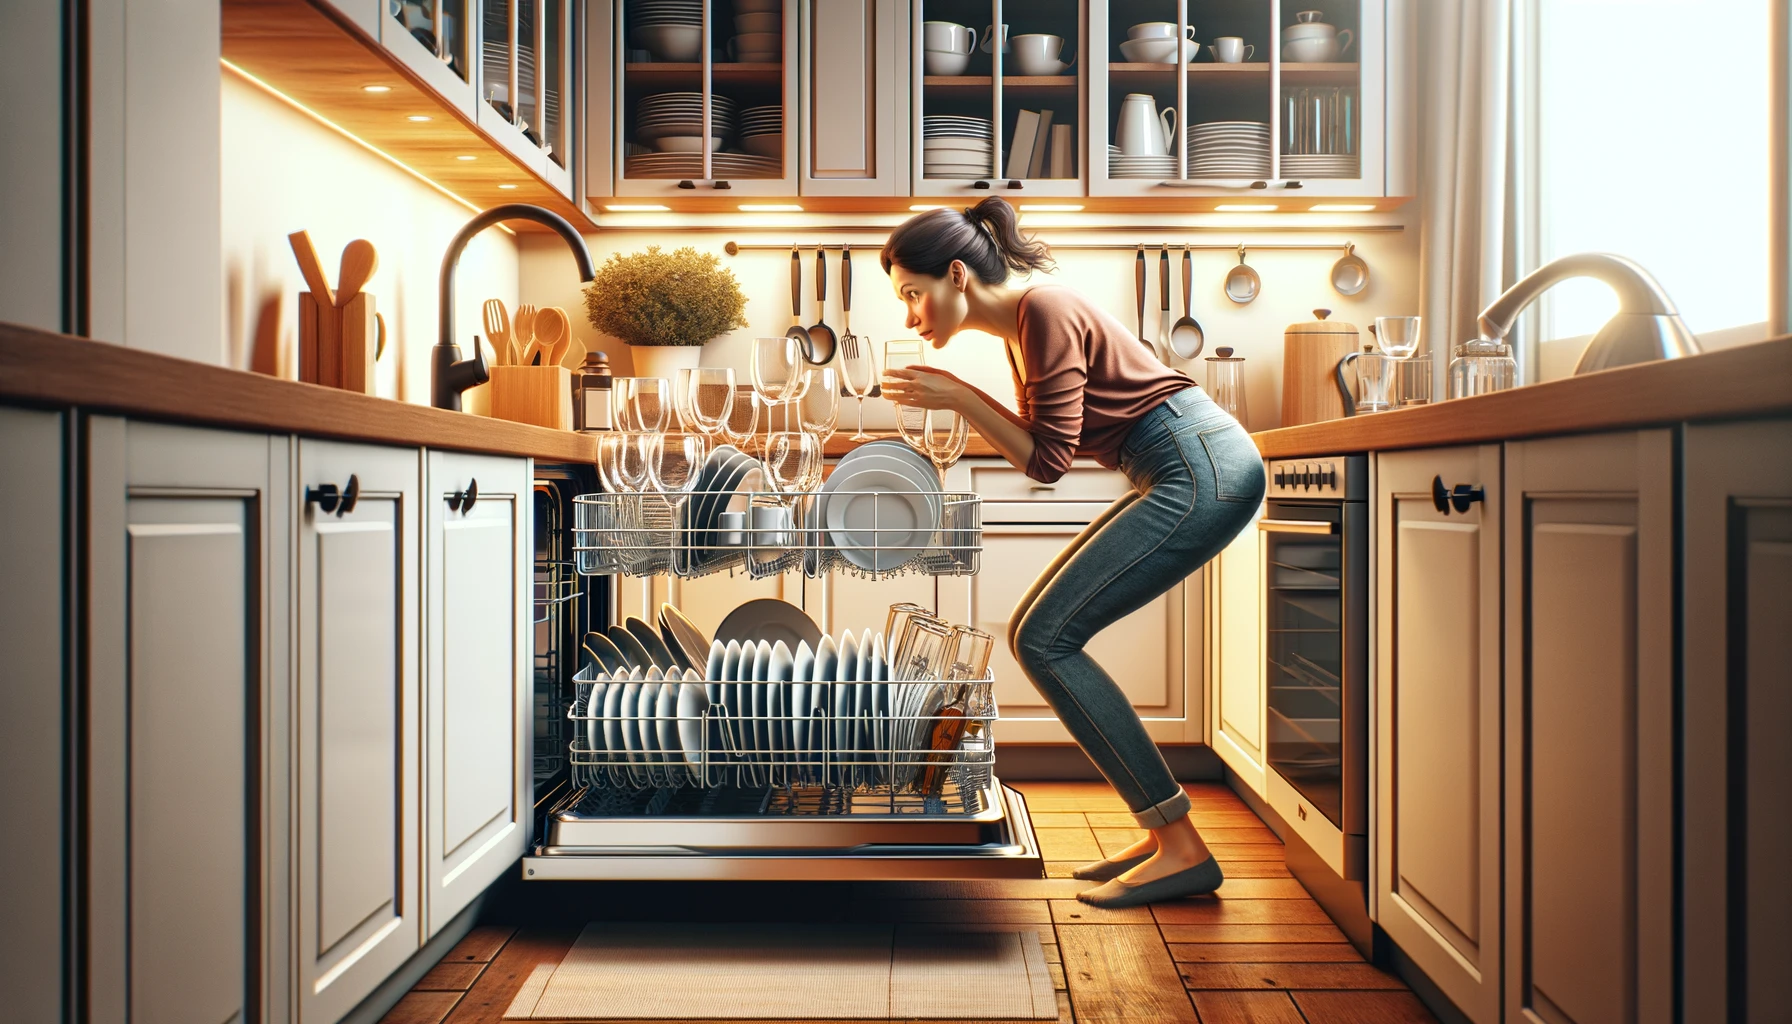 How To Help Your Dishwasher Run More Efficiently and Troubleshooting Tips